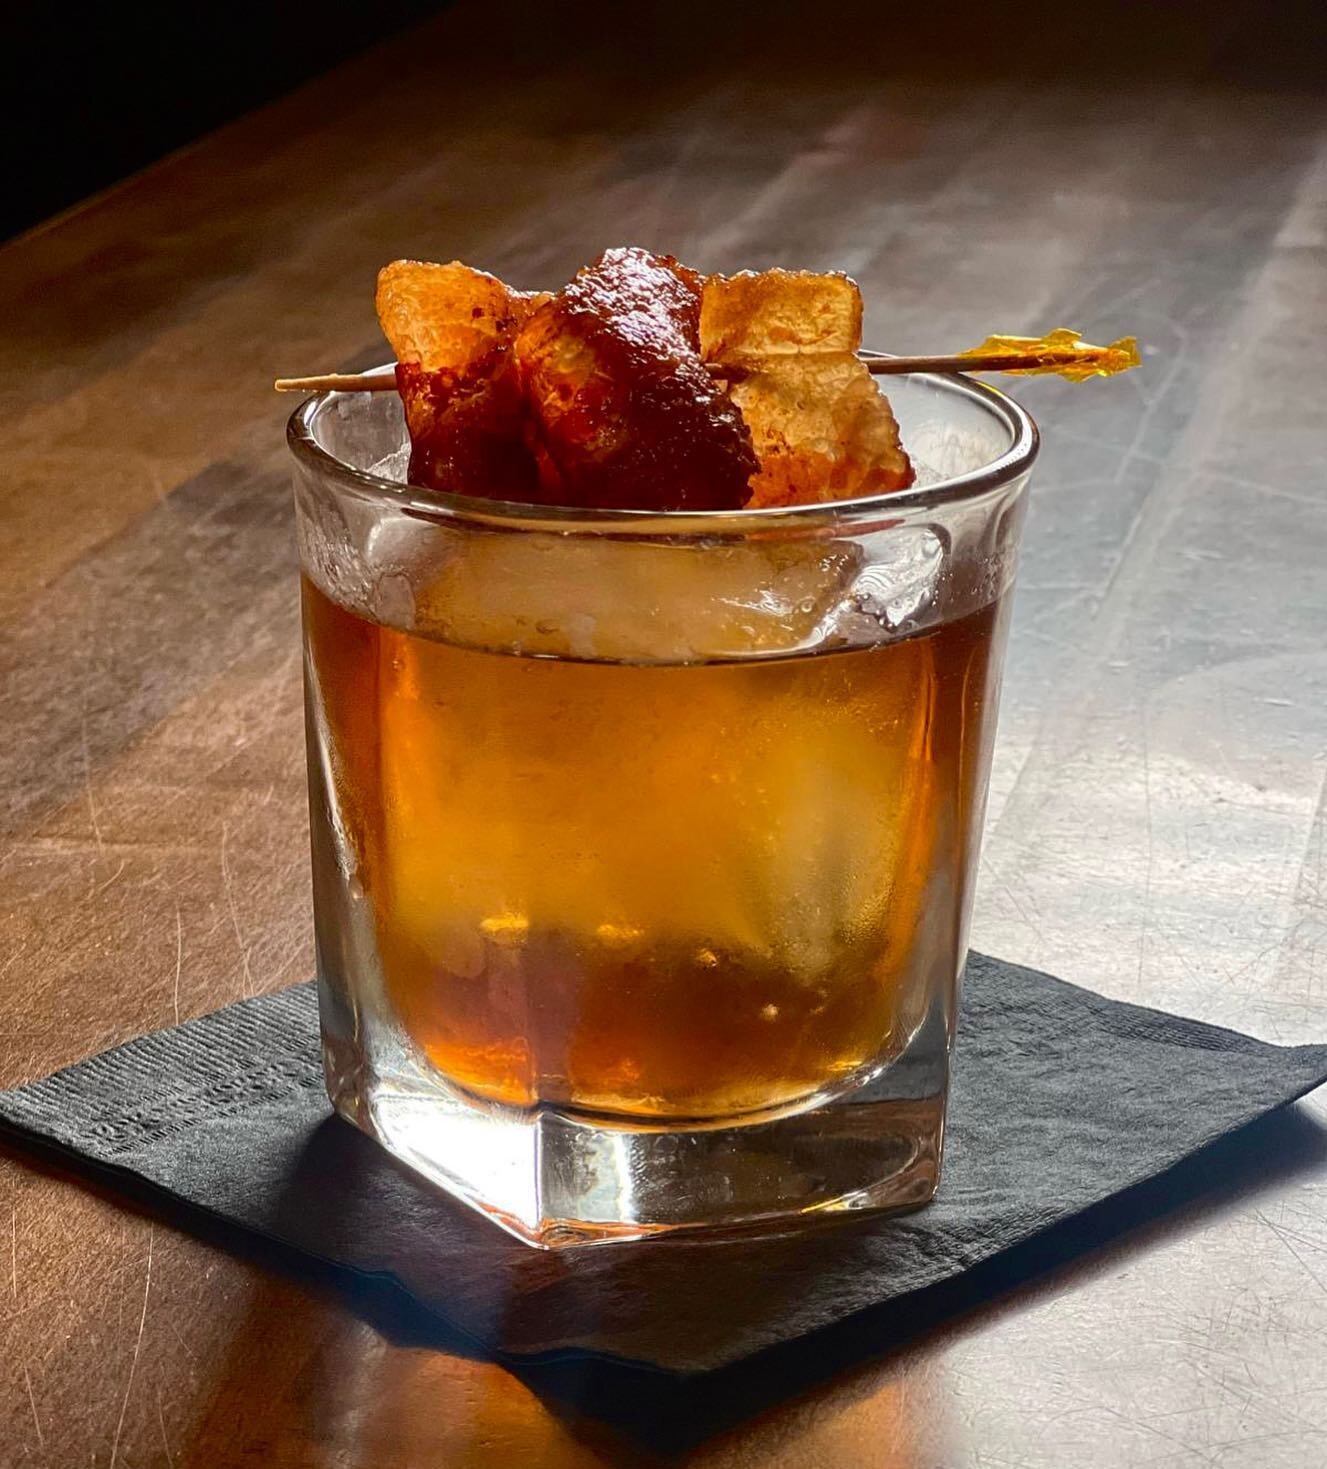 Get your Canadian on! We're pouring handcrafted 🇨🇦 cocktails all month long and you won't want to miss out!

🦫: Canadian Old Fashioned &ndash; @wearefortycreek Whiskey | Maple Syrup | Bitters | Candied Bacon
🦌: Moose Tracks &ndash; Forty Creek Wh